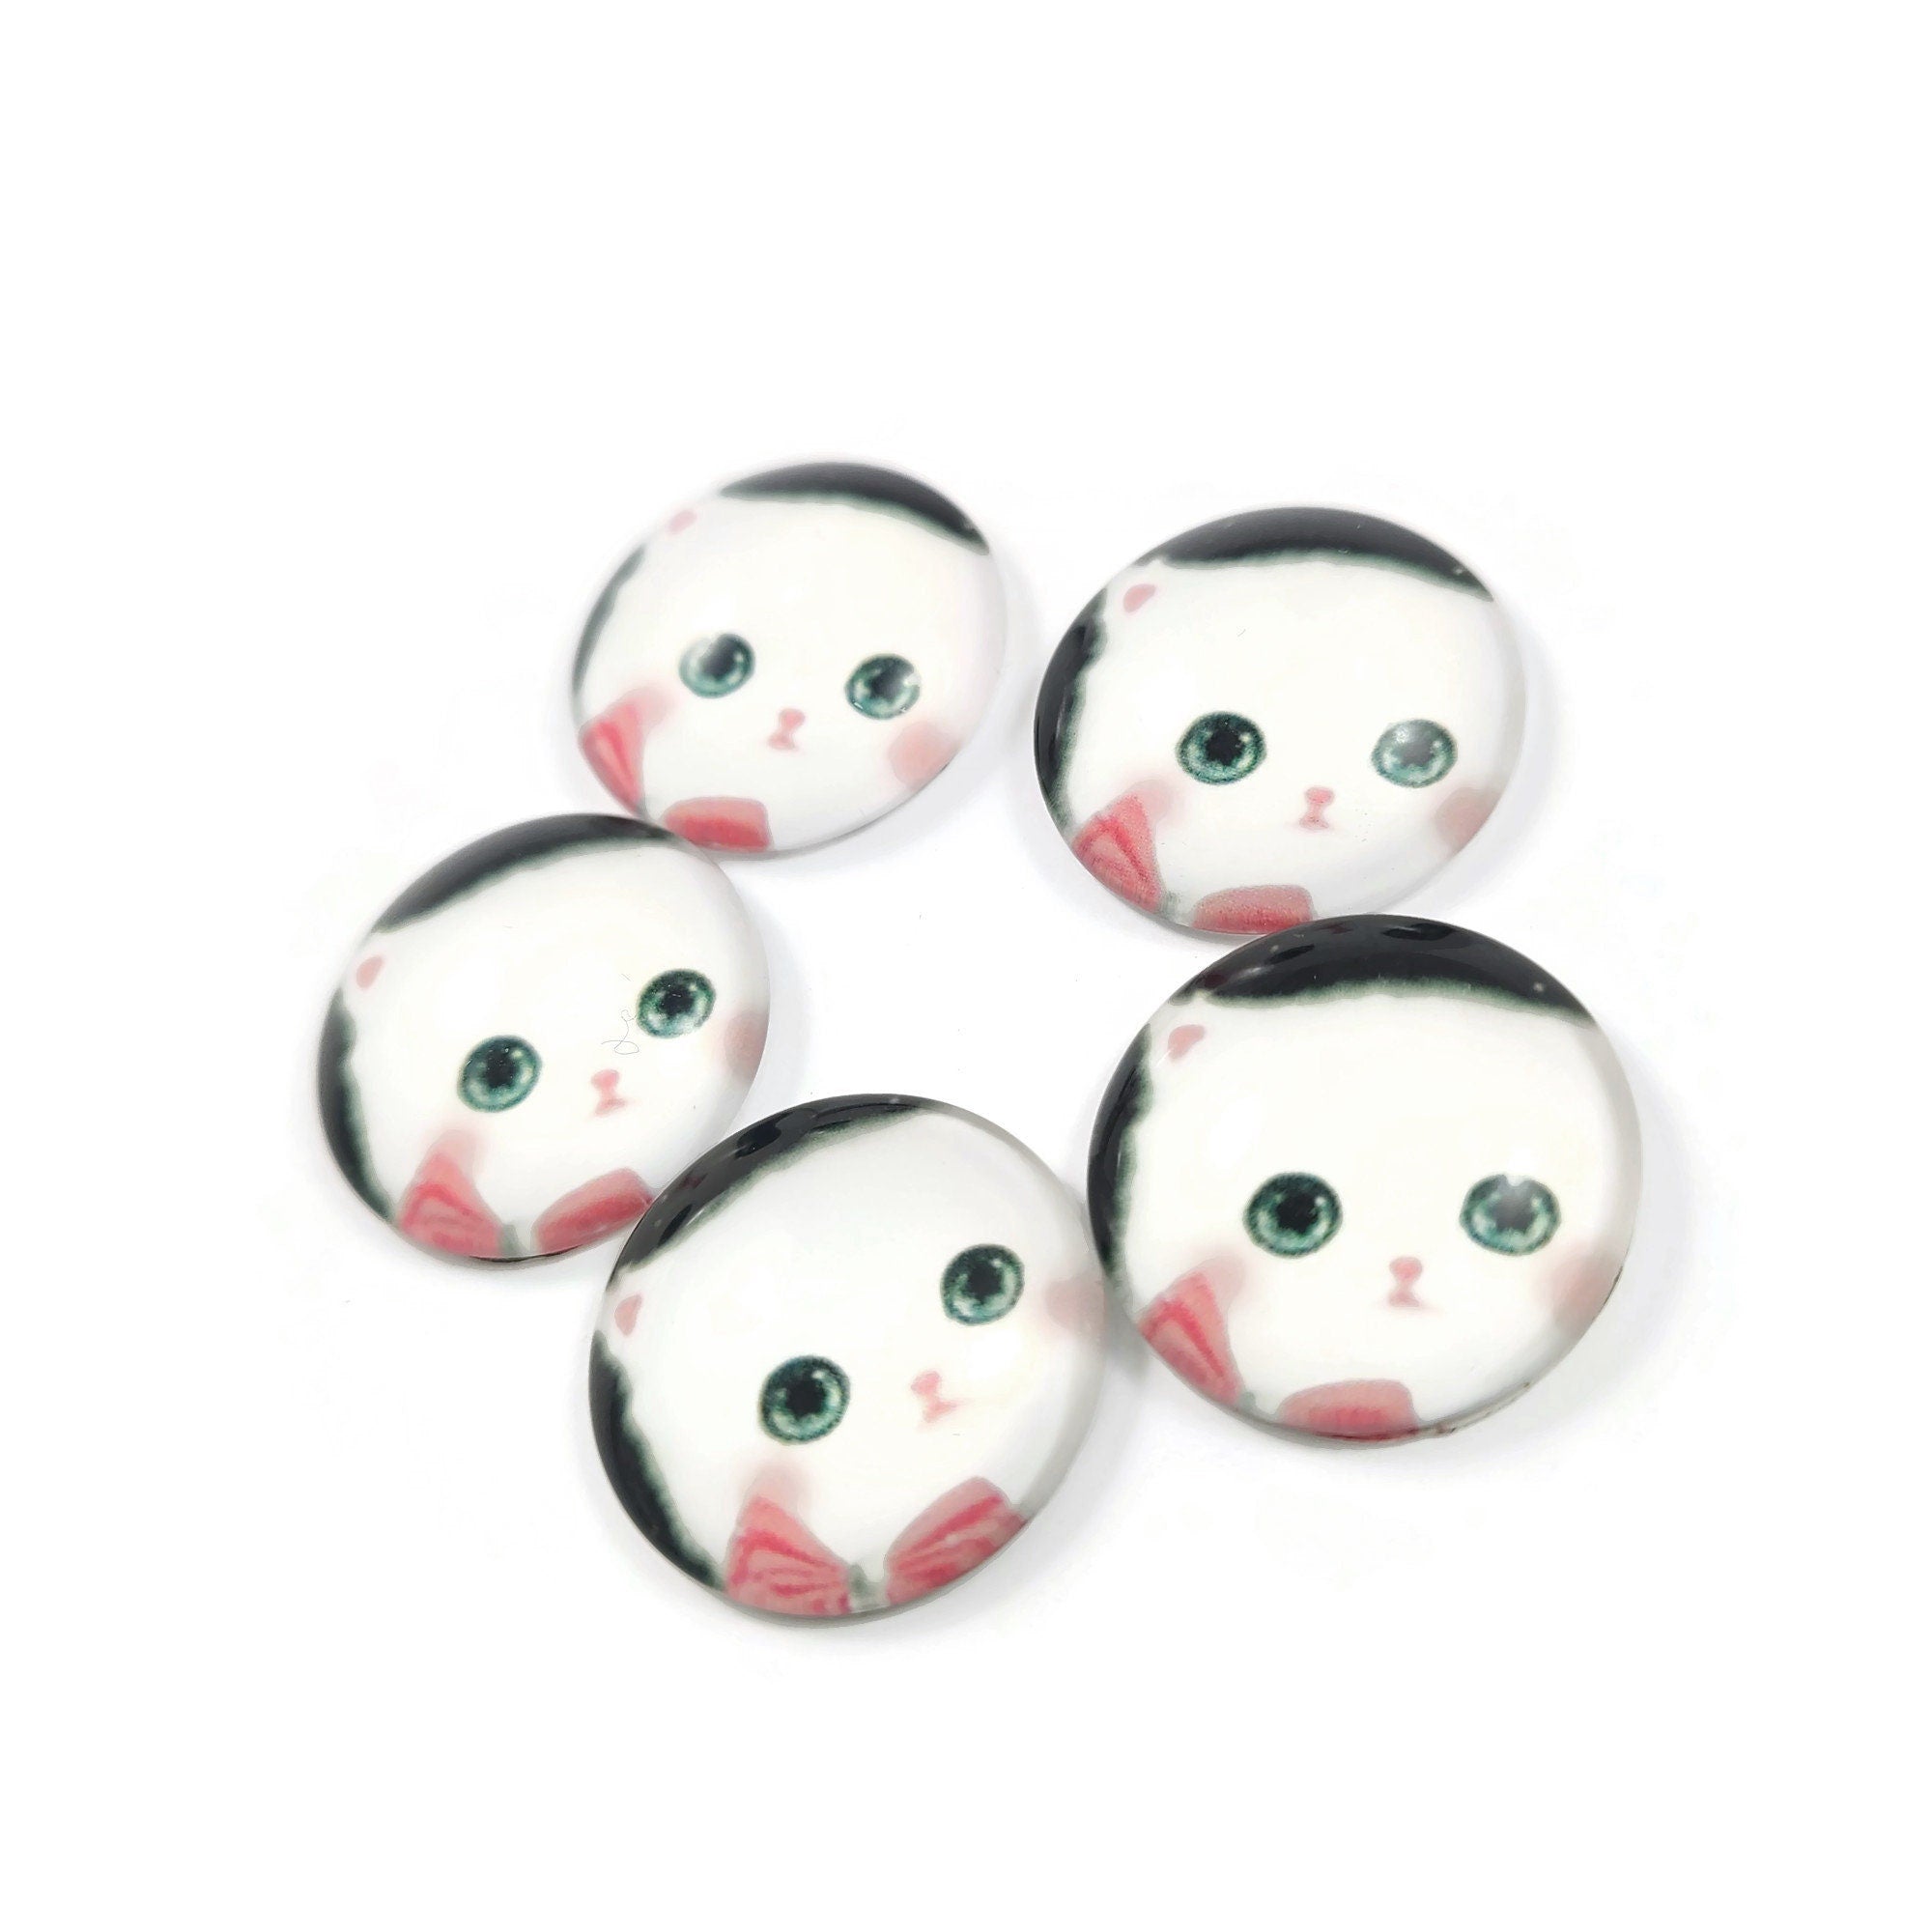 5 Cat glass cabochons, 20mm glass dome cabochon, Jewelry making supplies